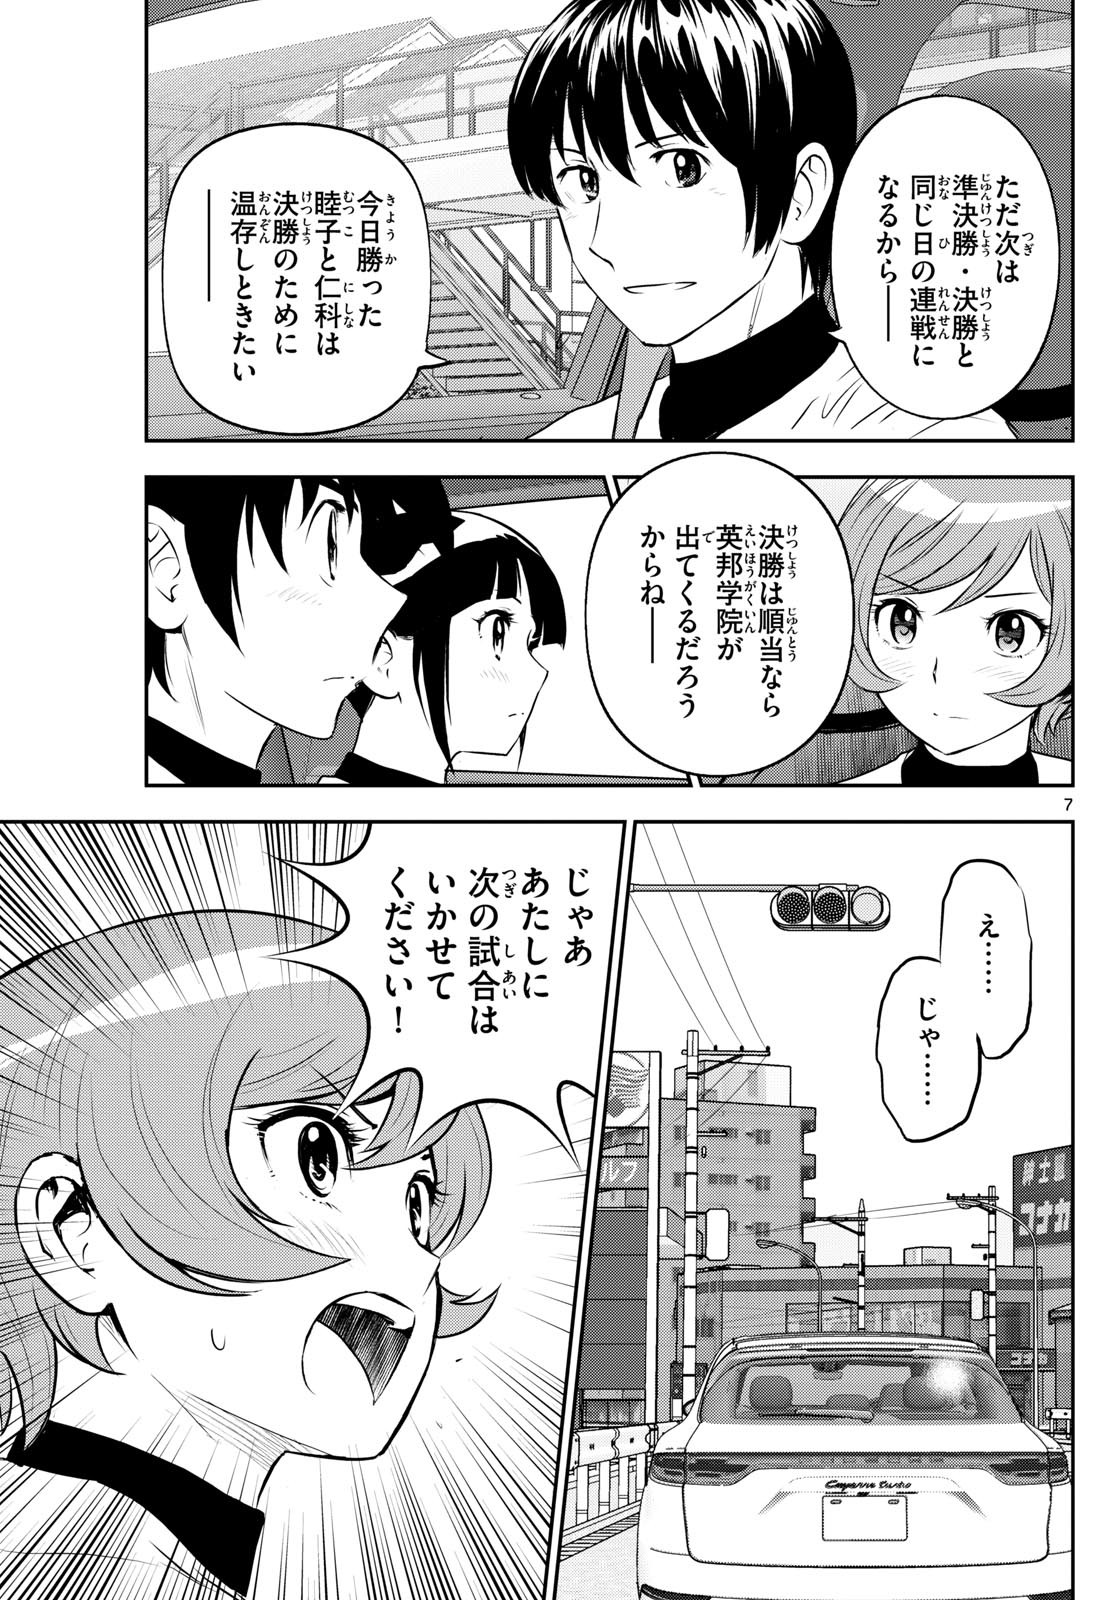 Major 2nd - メジャーセカンド - Chapter 278 - Page 7